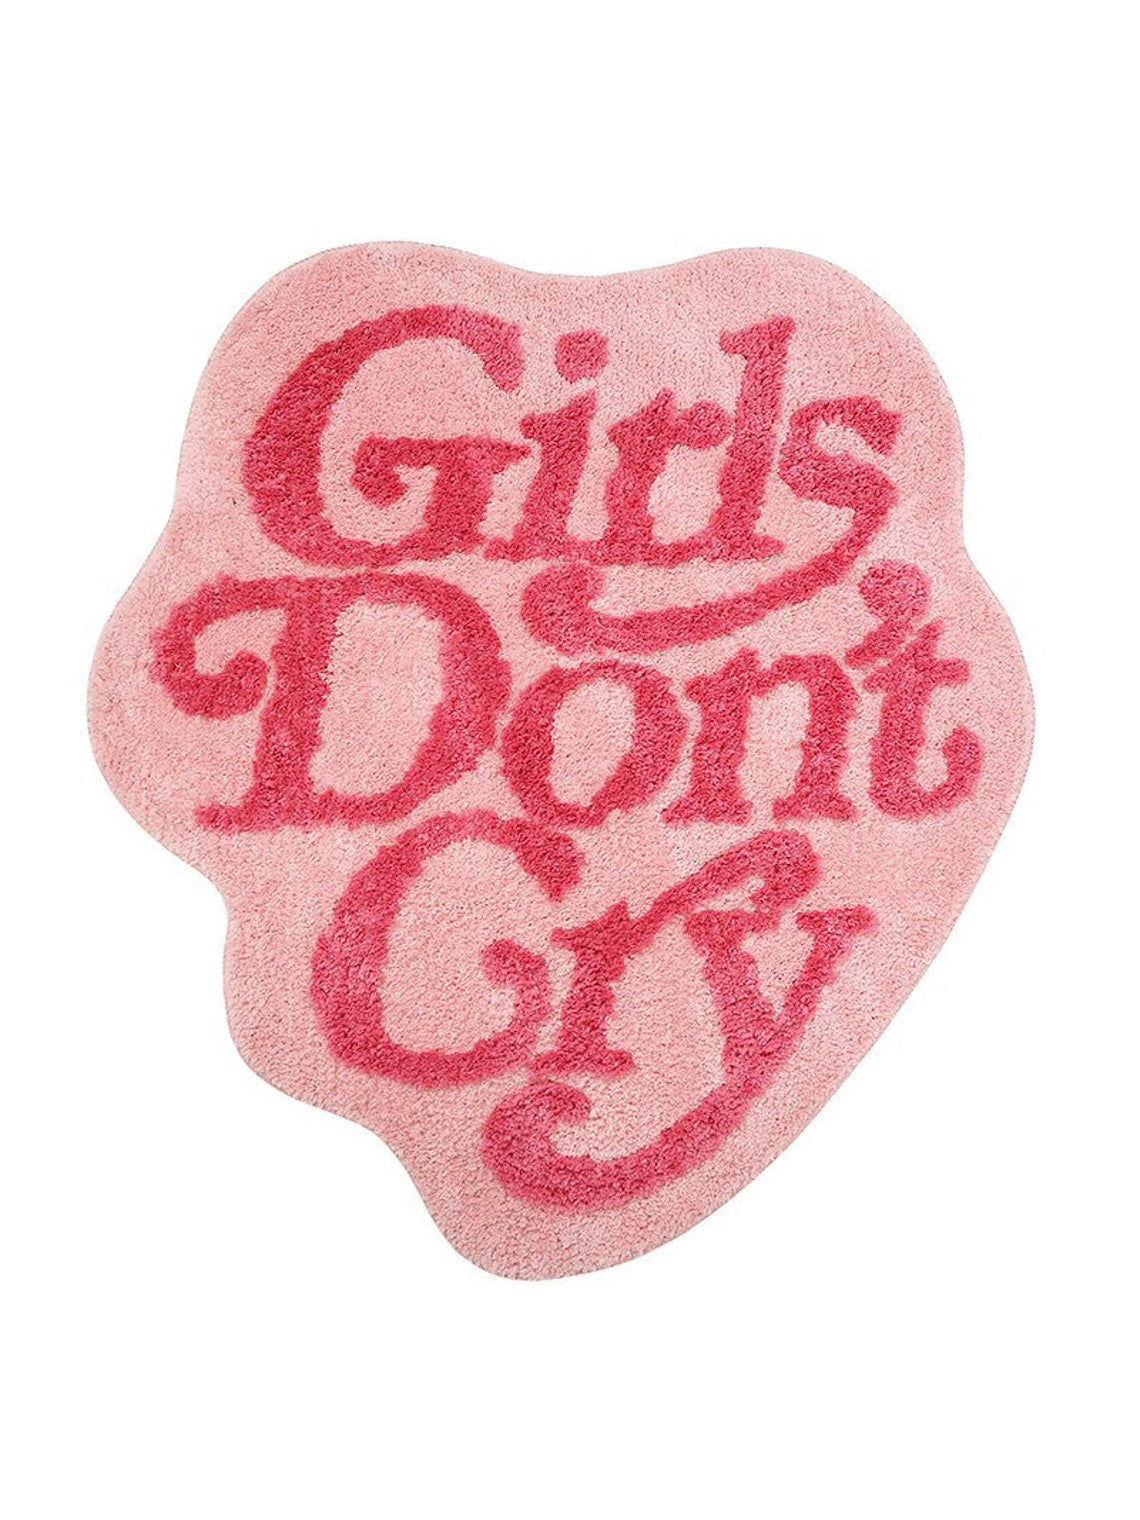 Girls Don't Cry Rug - Time's Reel